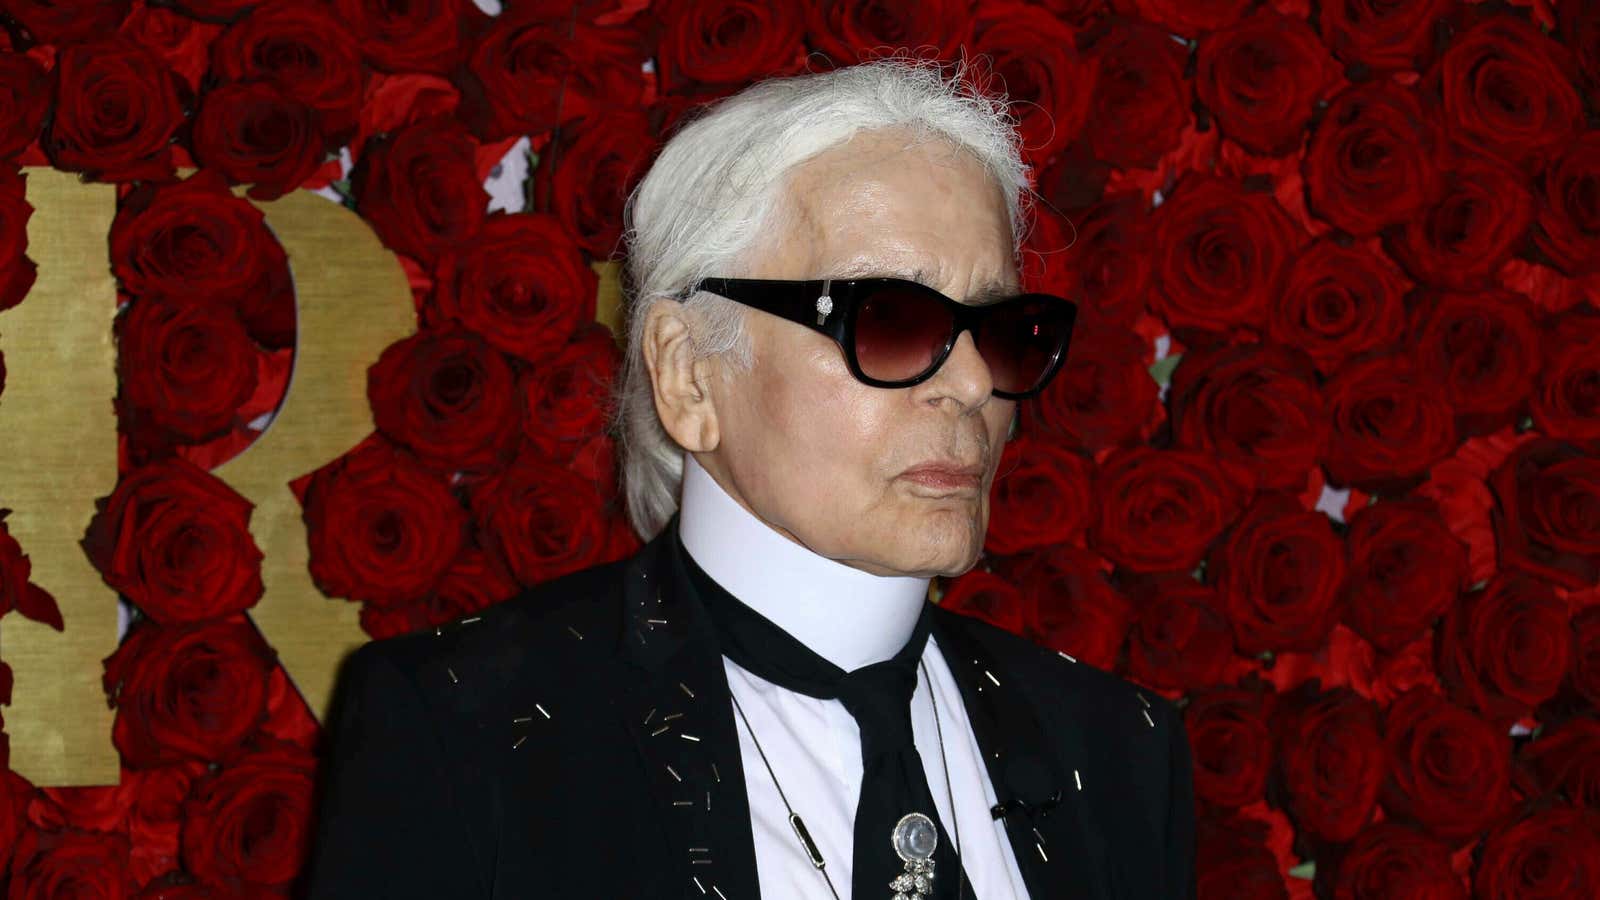 It’s fair to say Karl Lagerfeld was problematic.